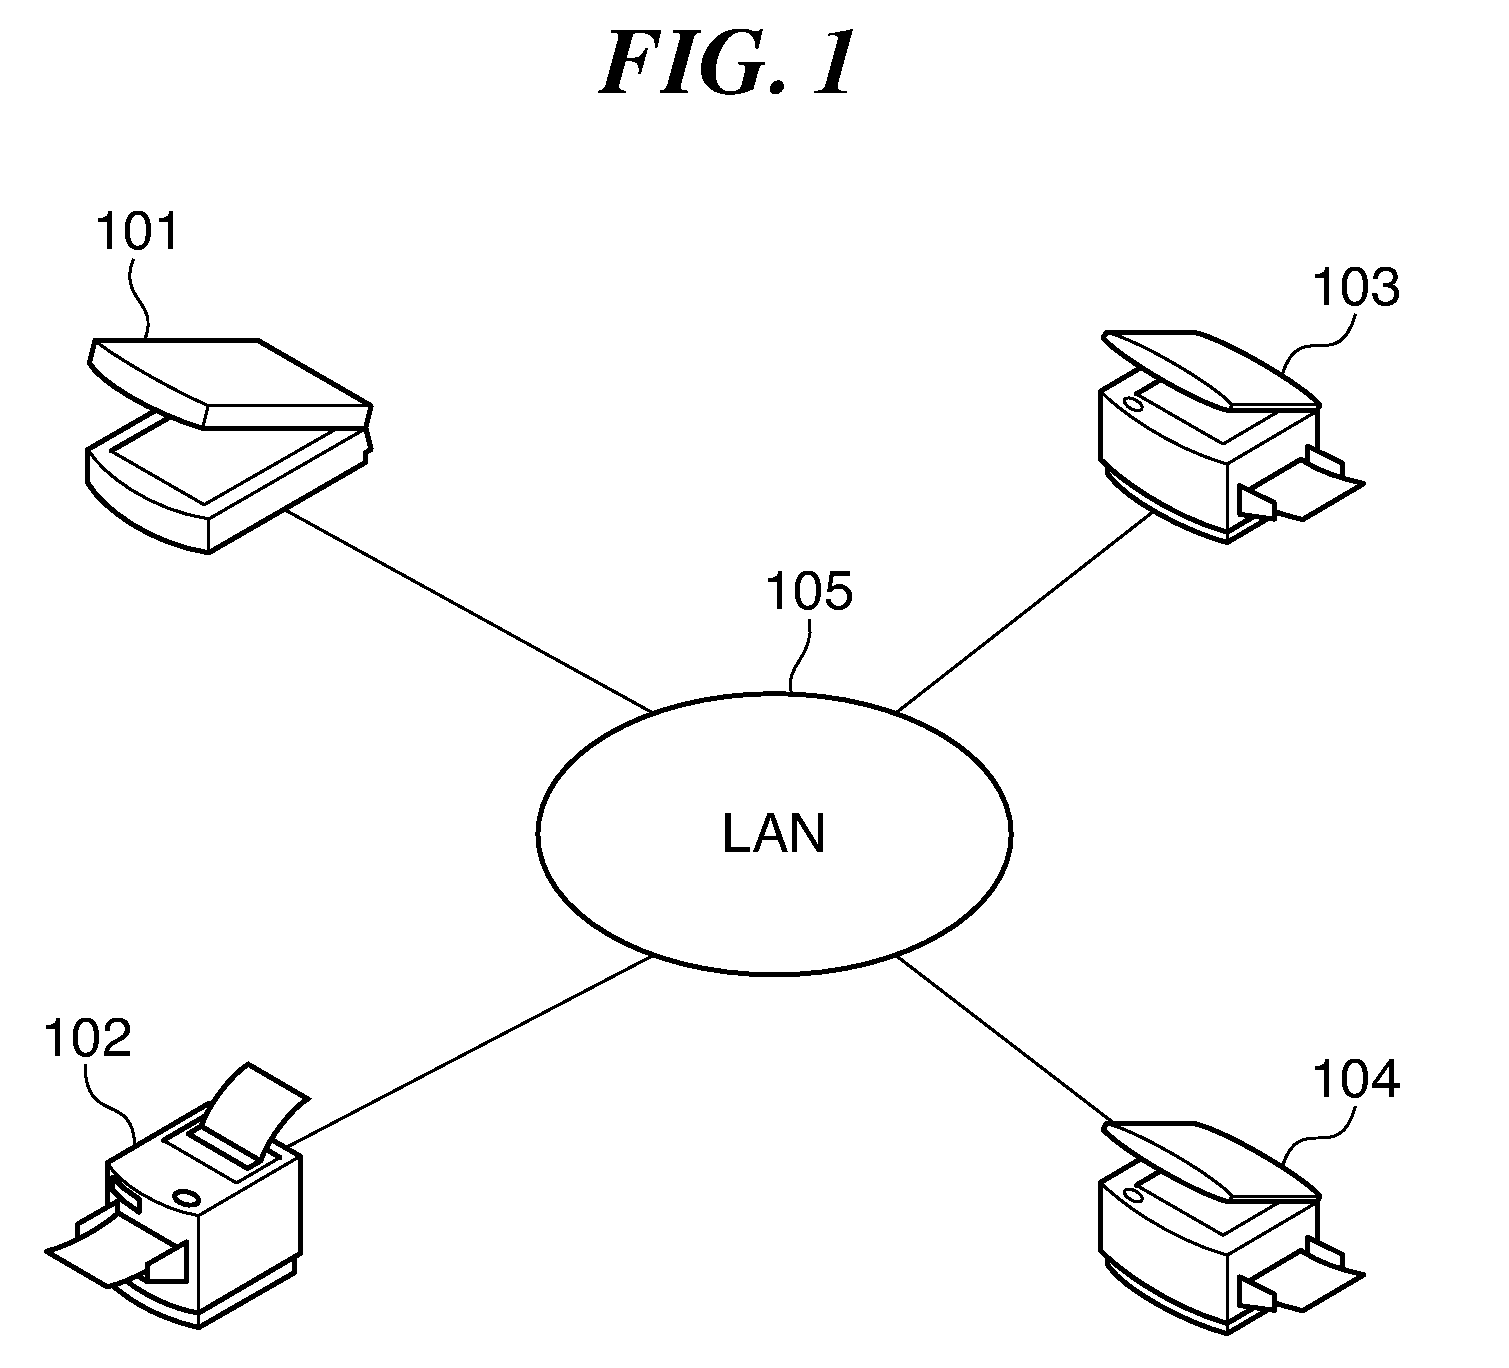 Image processing system, image processing apparatus, control method for image processing apparatus, and control program for image processing apparatus